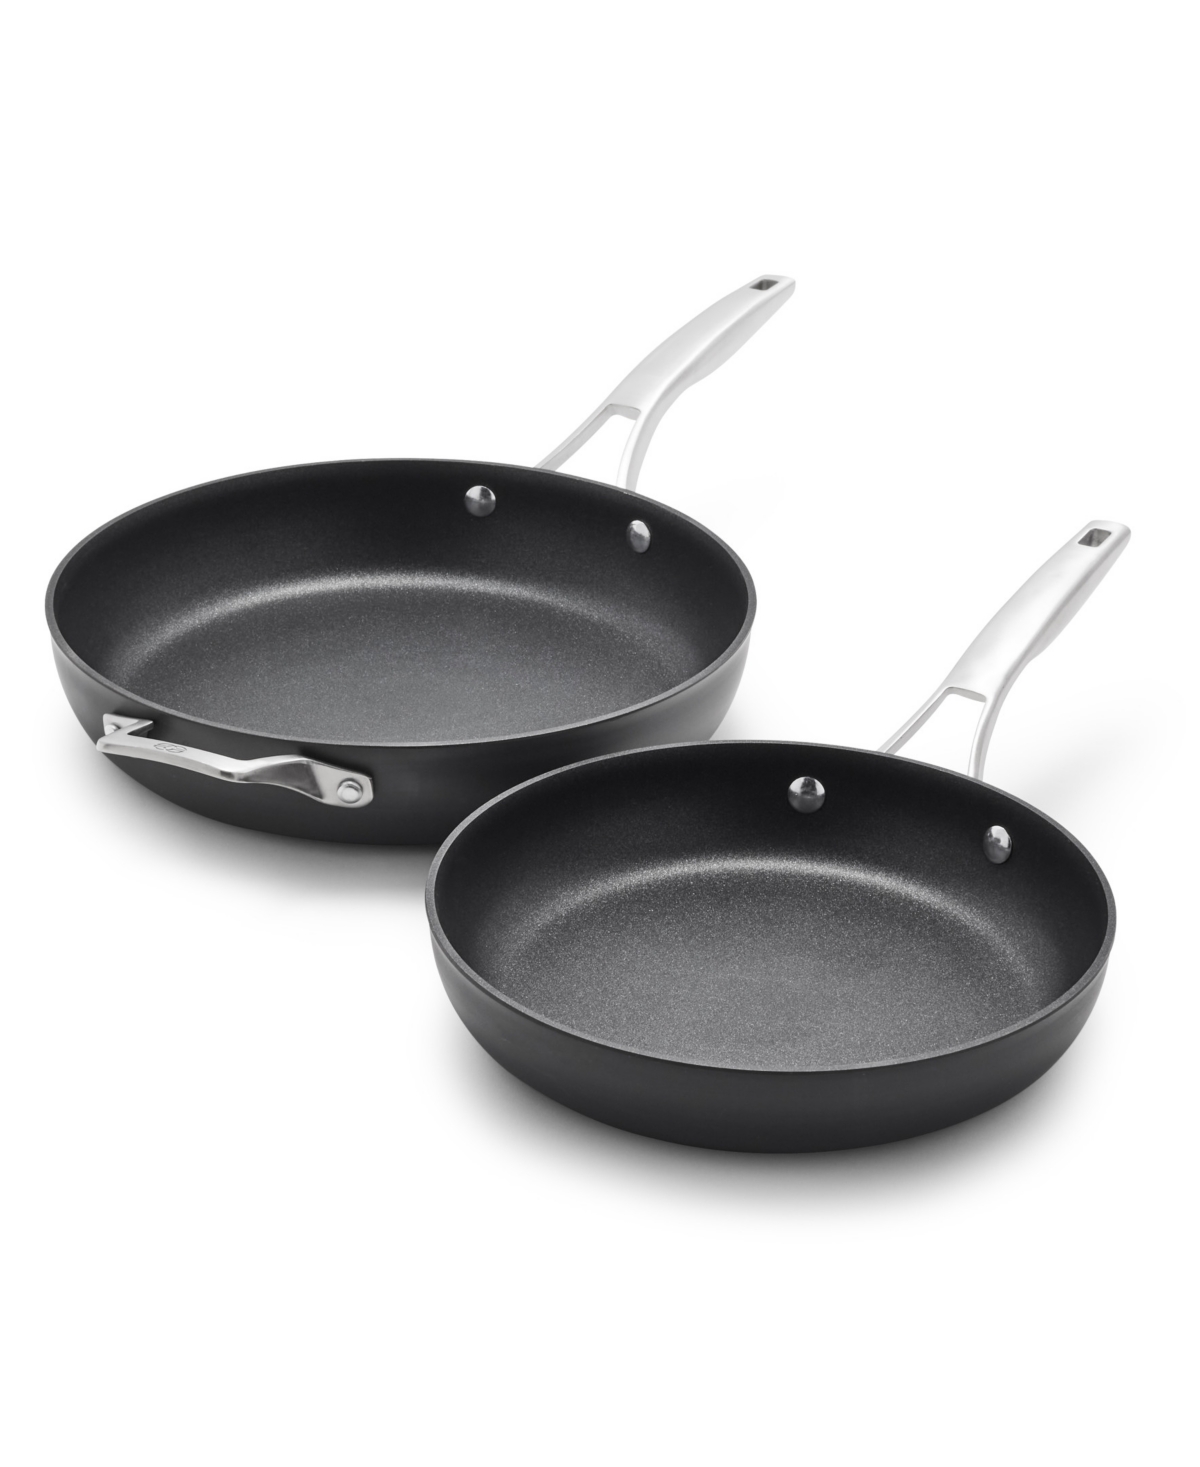 Calphalon Premier Hard-anodized Nonstick 10" And 12" Frying Pans Set In Black,stainless Steel